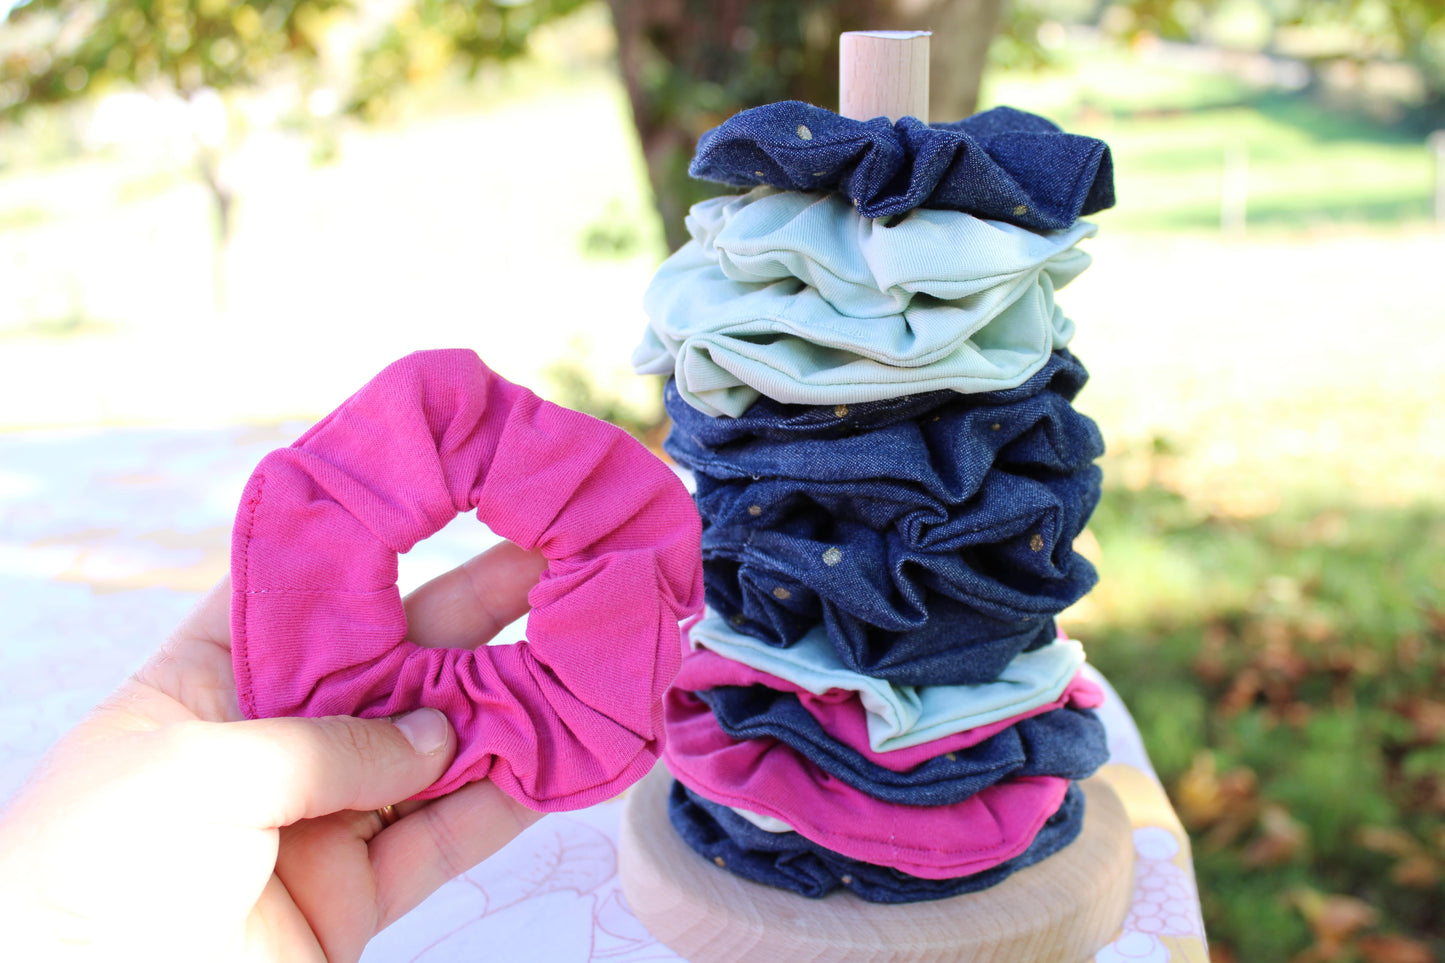 Set of 3 child-sized elasticated scrunchie scrunchies, colored hair accessories, Oeko-Tex certified cotton fabric and mottled upcycled fabric